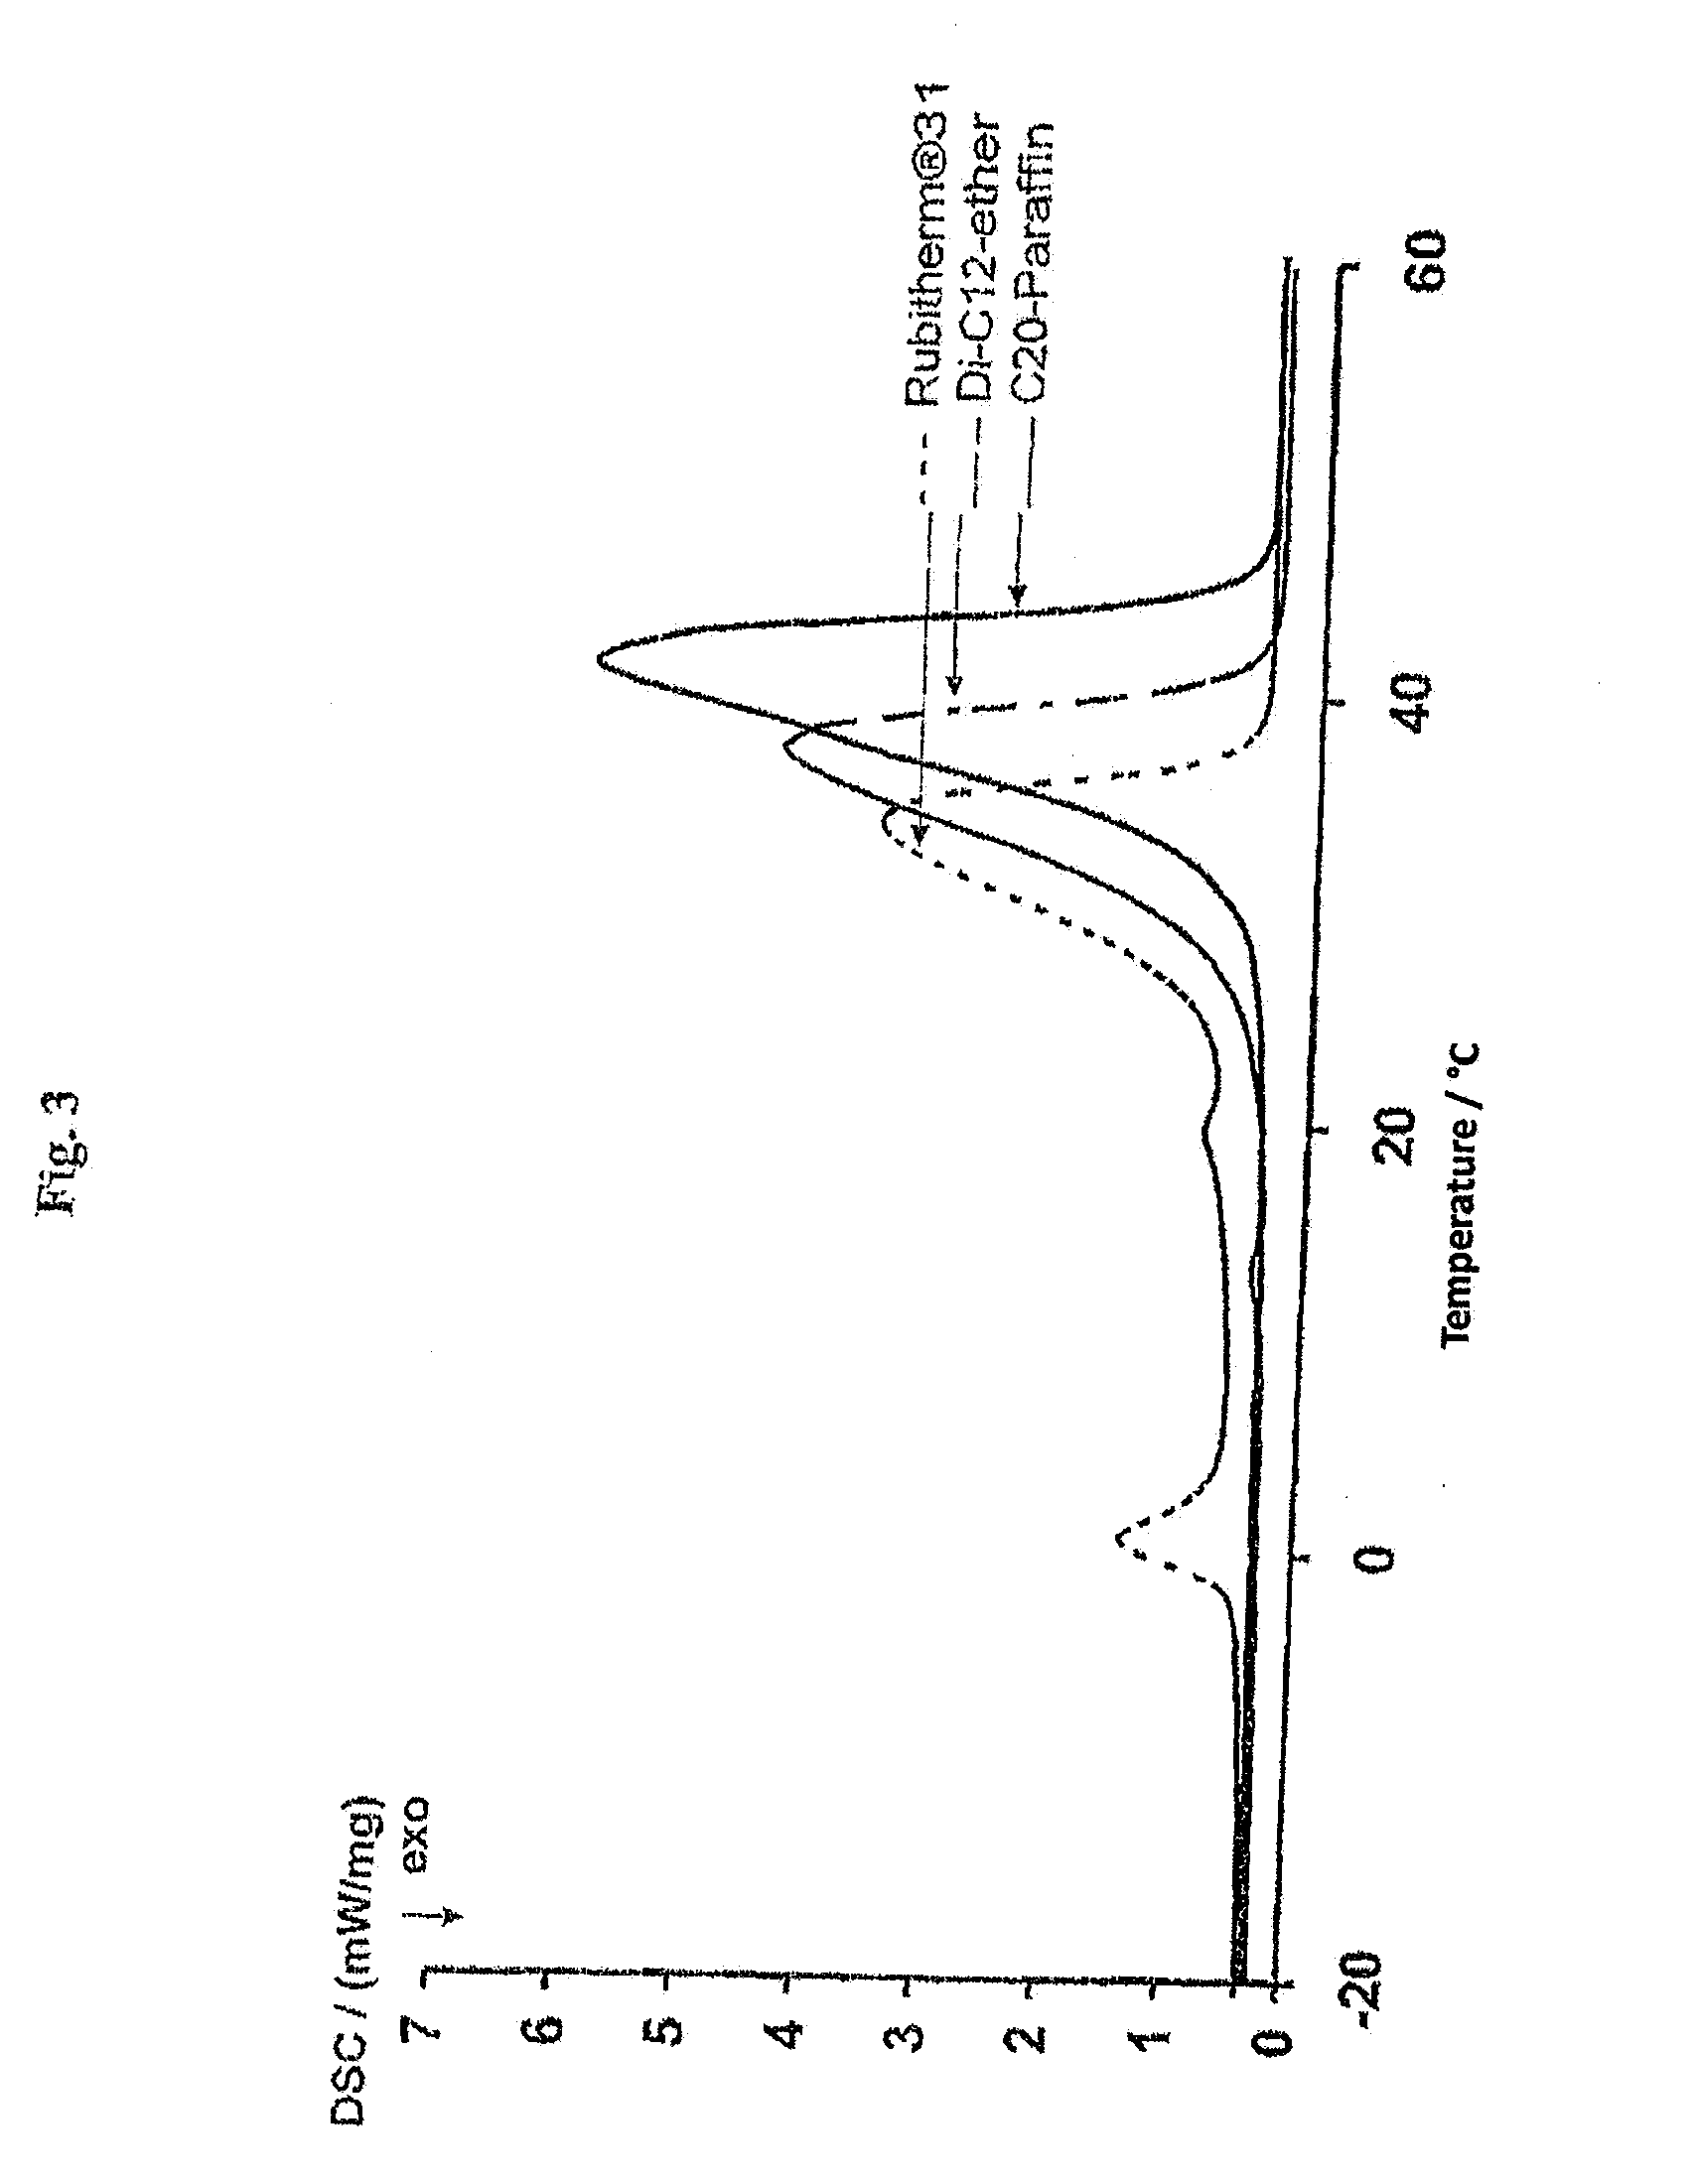 Method for Producing a Latent Heat Storage Material and Dialkyl Ether as a Latent Heat Storage Material